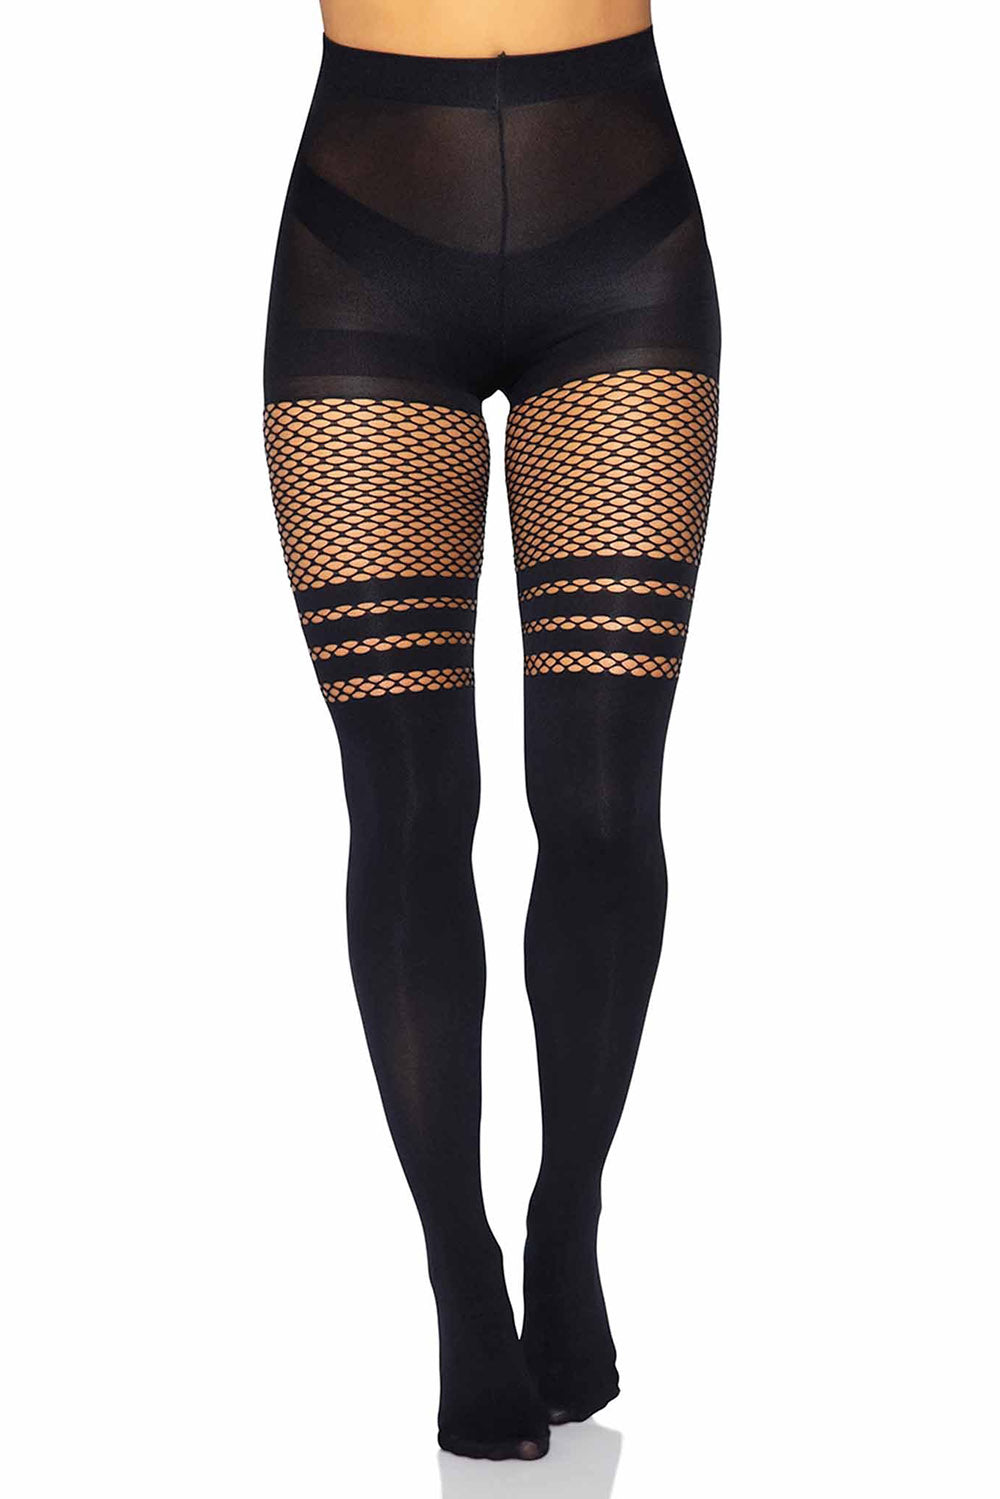 Scalloped Faux Thigh High Tight  Thigh highs, Tights, Thigh high tights